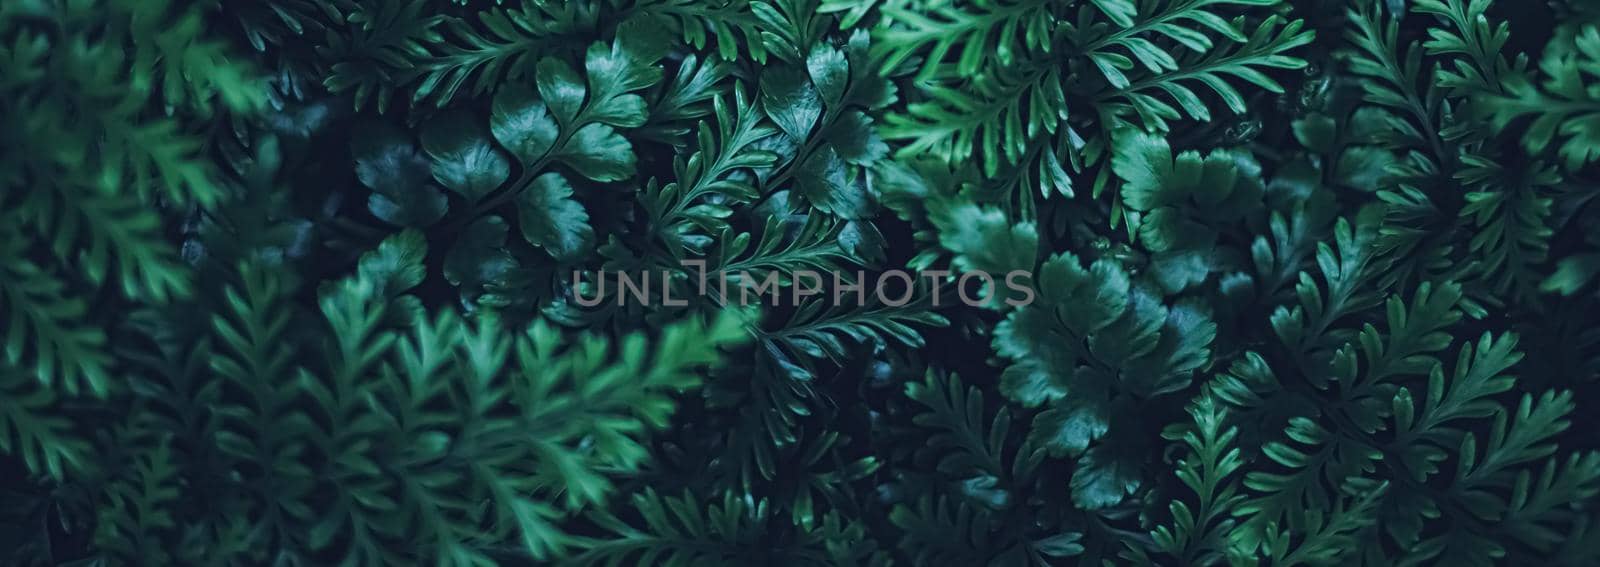 Exotic plant leaves at night as nature background closeup